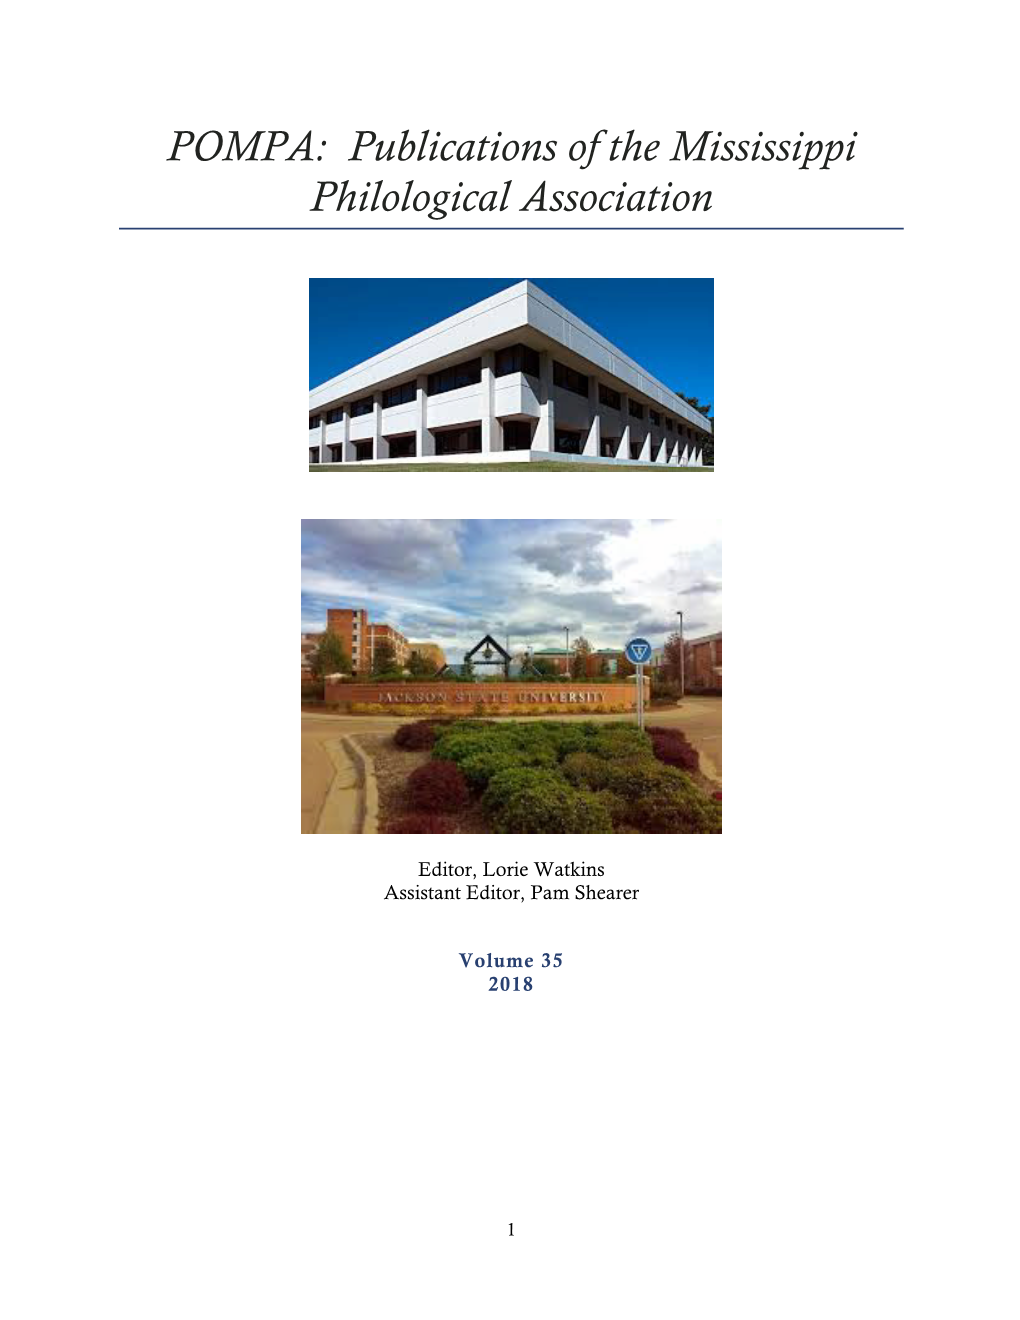 POMPA: Publications of the Mississippi Philological Association